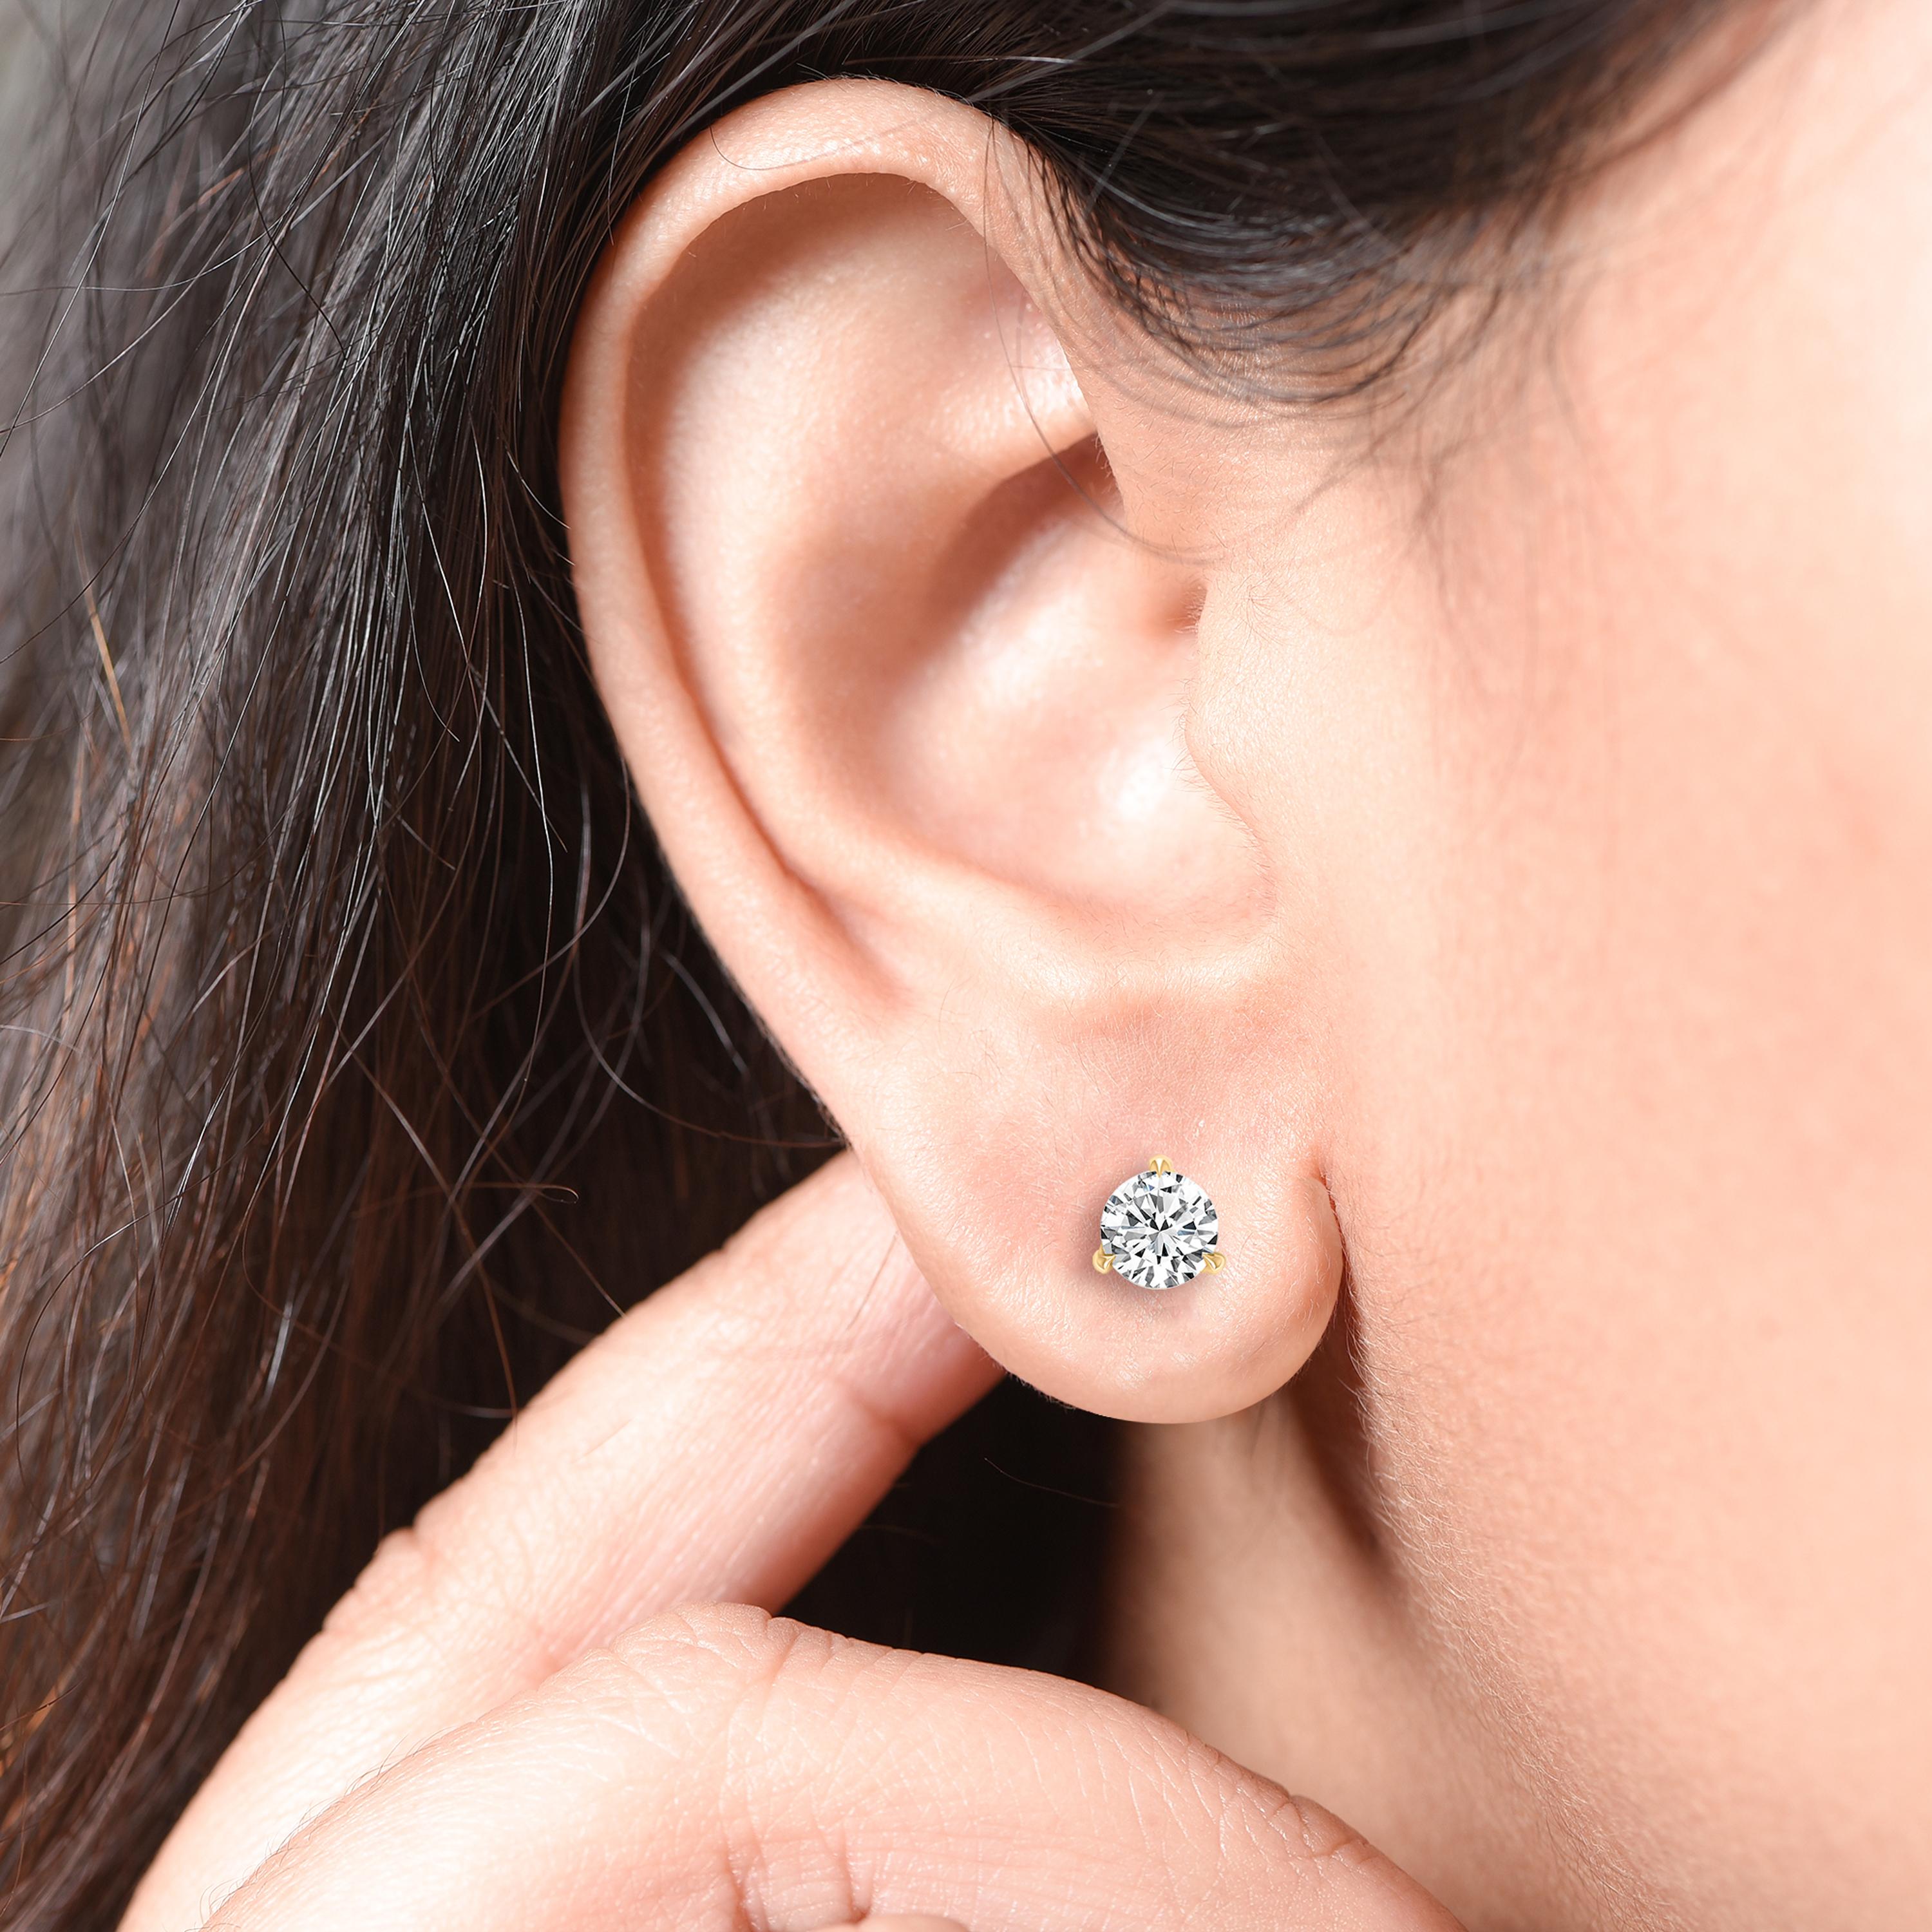 These GIA certified classic diamond studs showcase a pair of perfectly matched diamonds weighing total 1.00 carat. Crafted in 18-karat yellow gold, these three prong earrings are available in white and rose gold as well.

Perfect for gifting and for